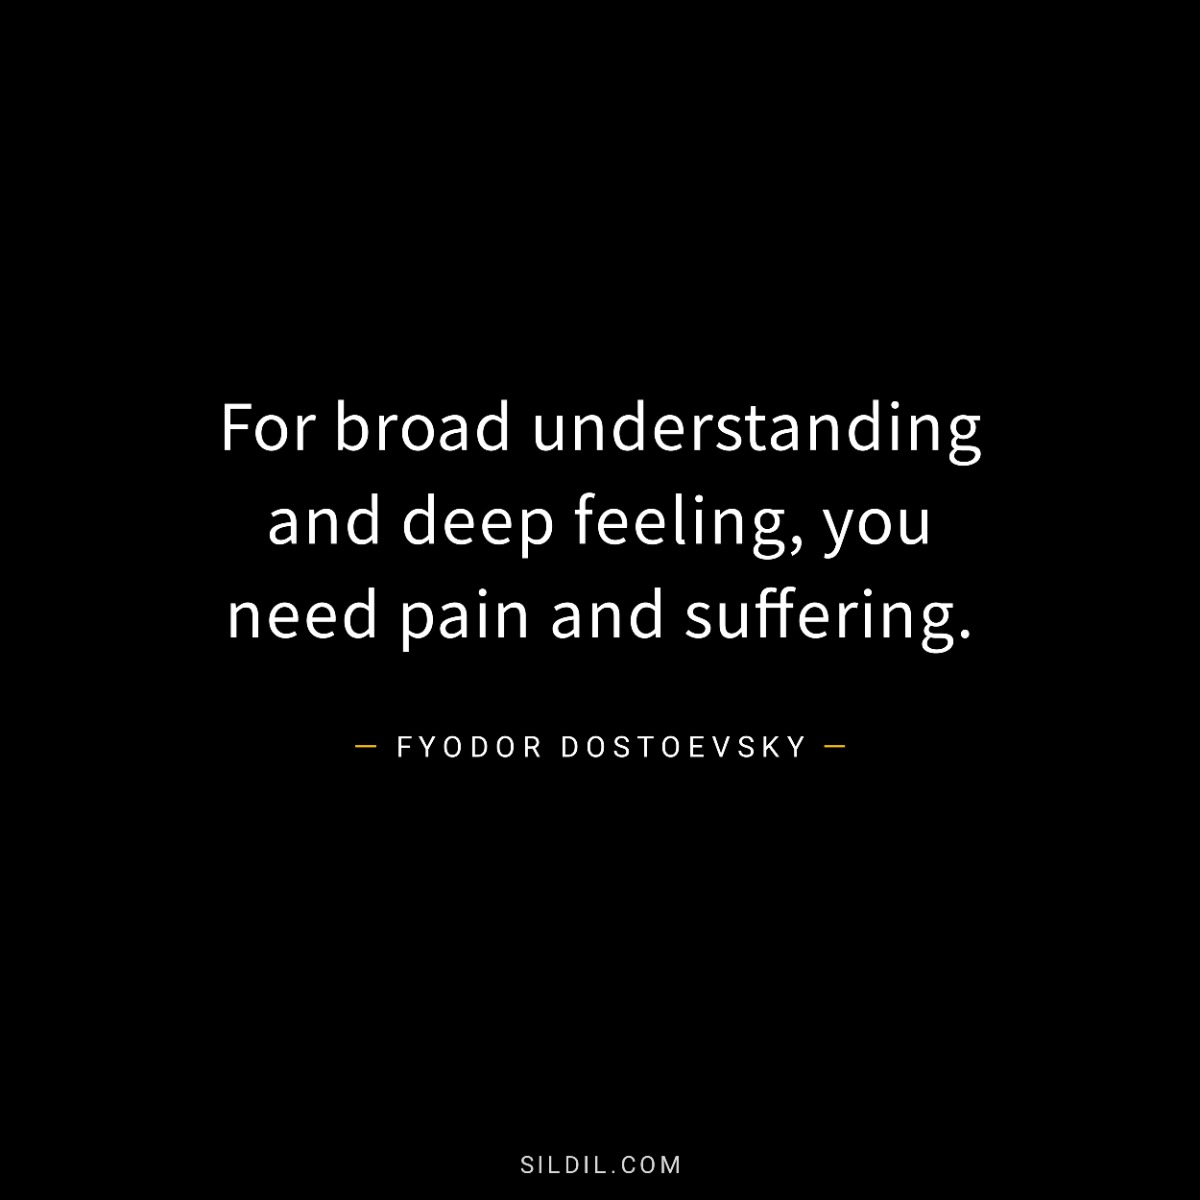 For broad understanding and deep feeling, you need pain and suffering.